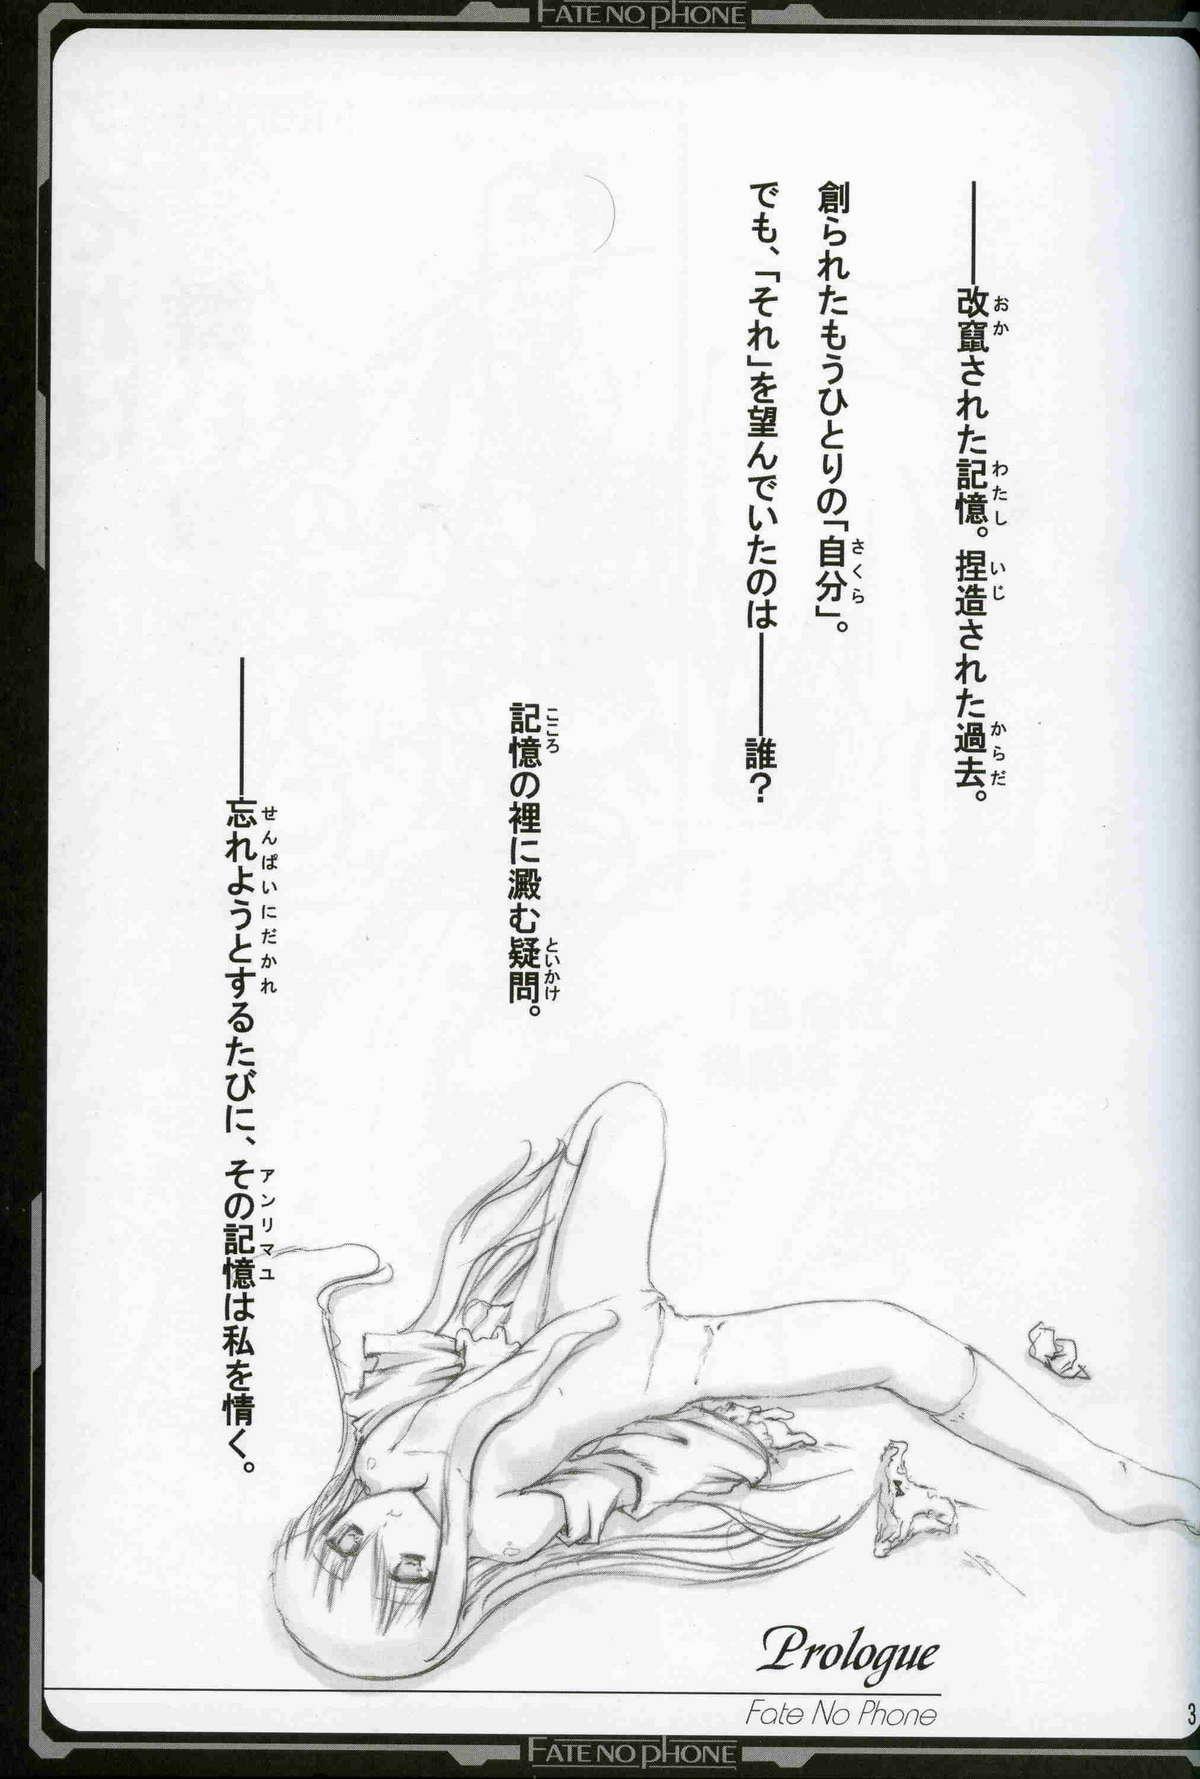 Sofa Fate/no phone - Fate stay night Ball Sucking - Page 2